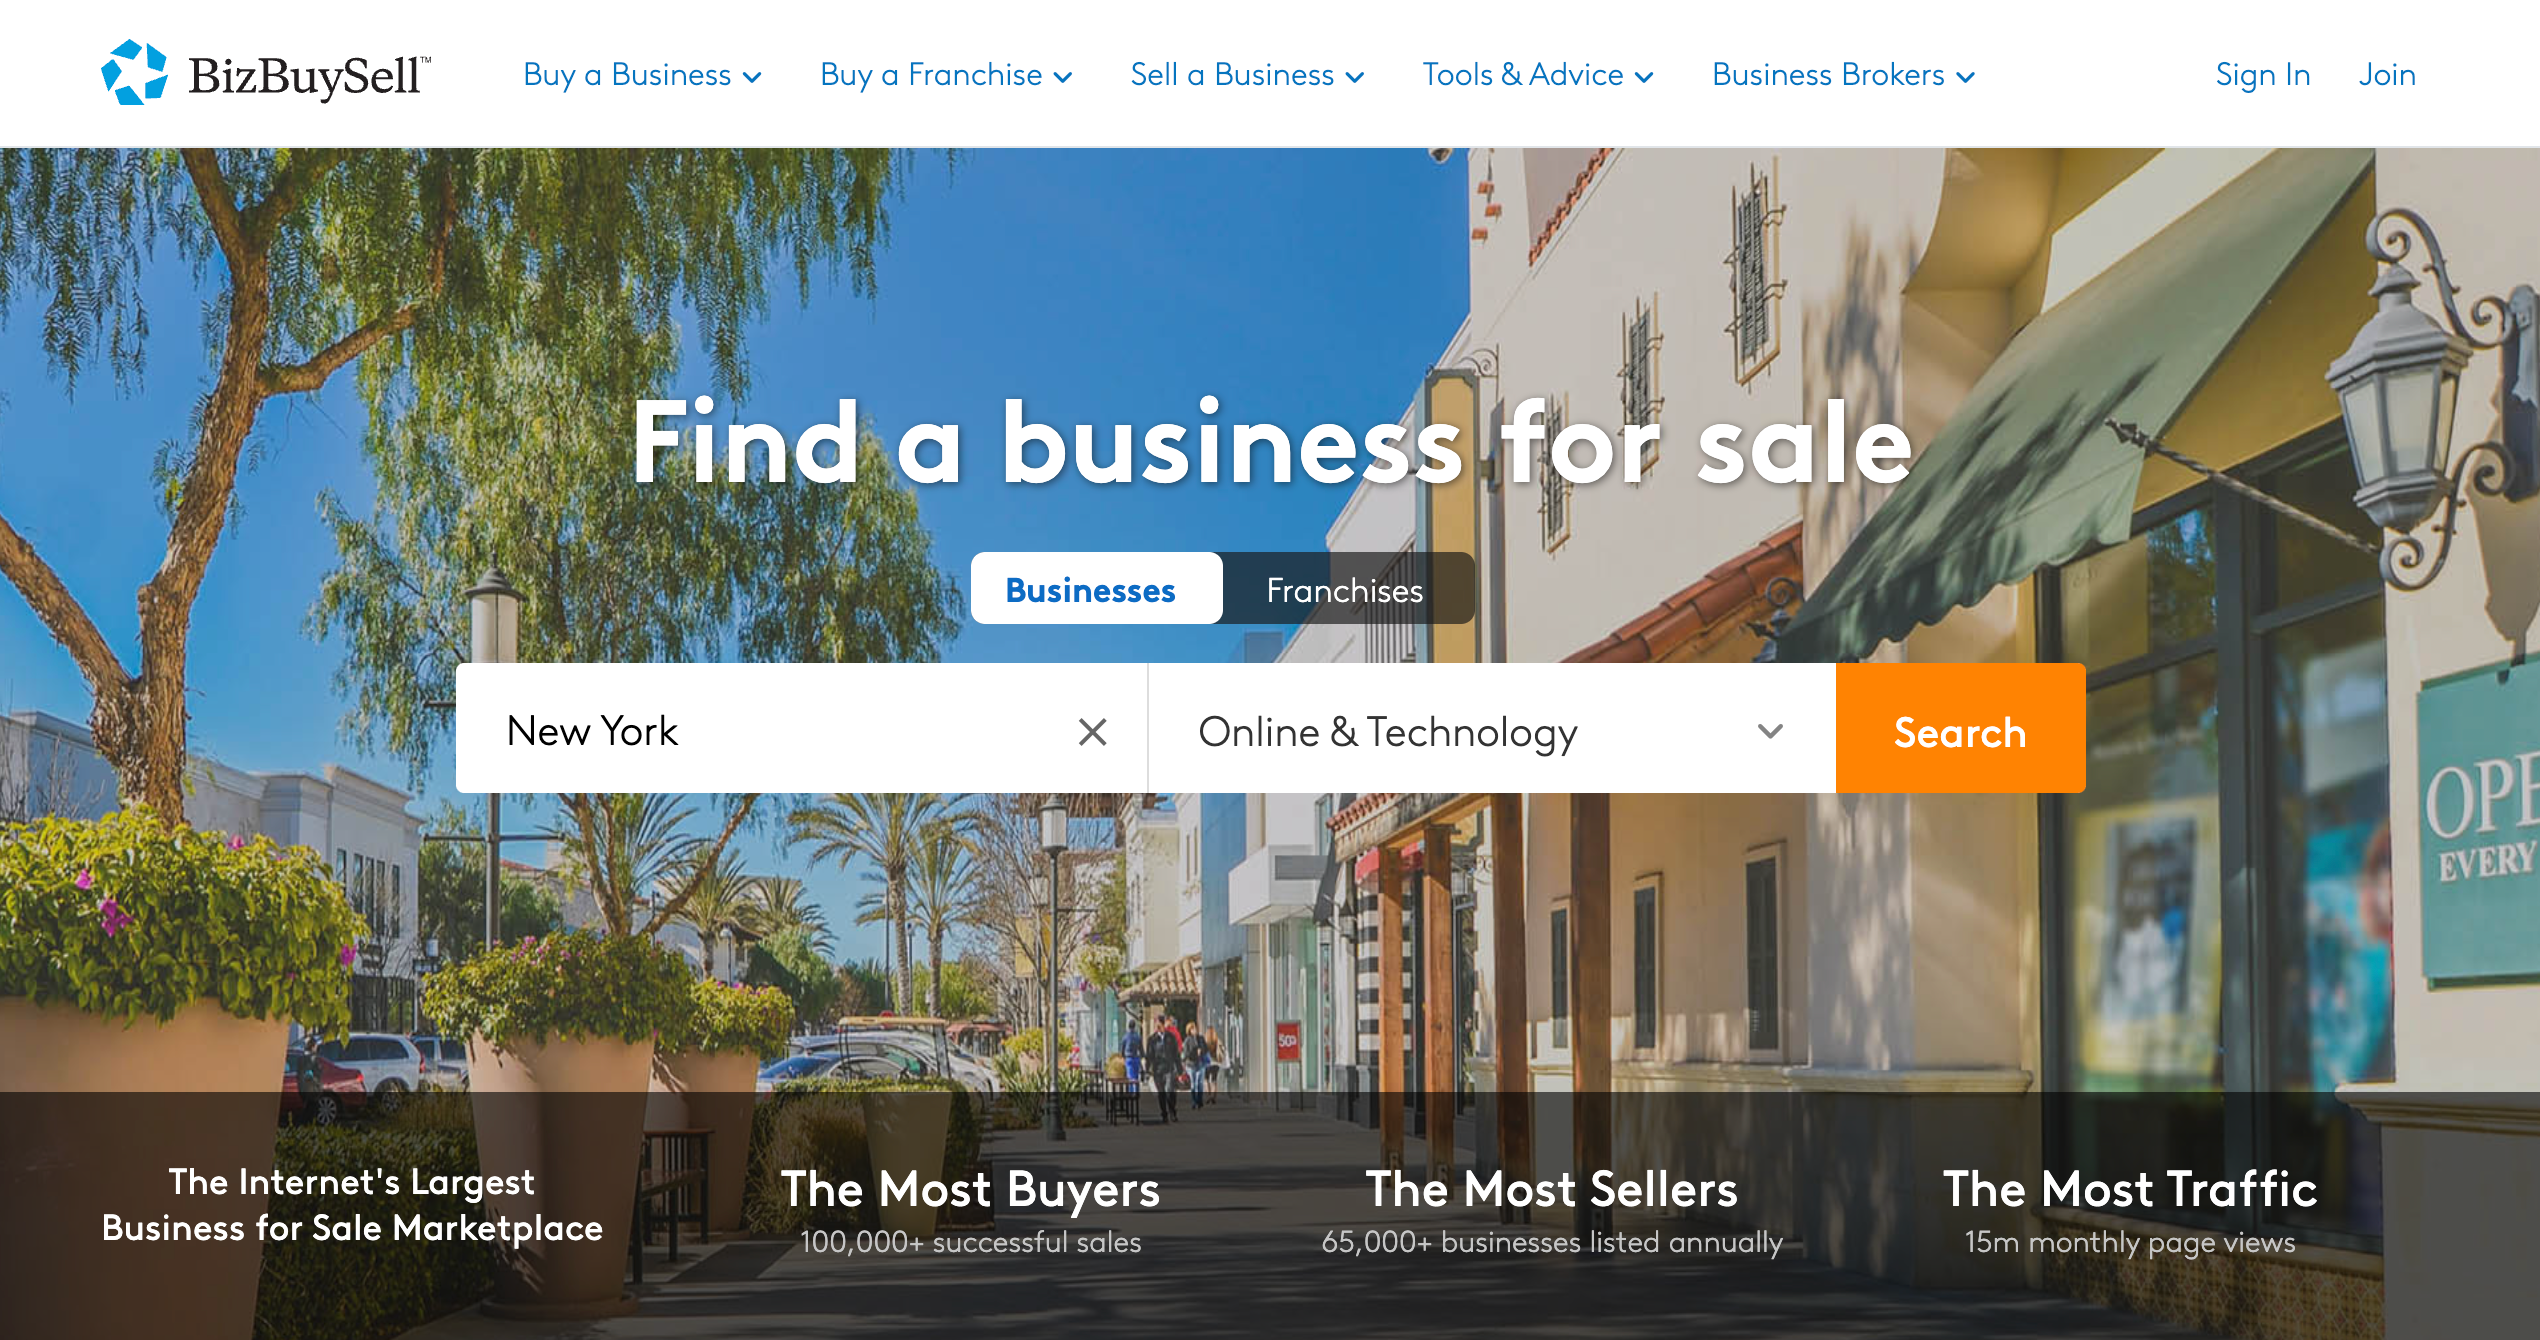 BizBuySell homepage showing user searching for online businesses in New York